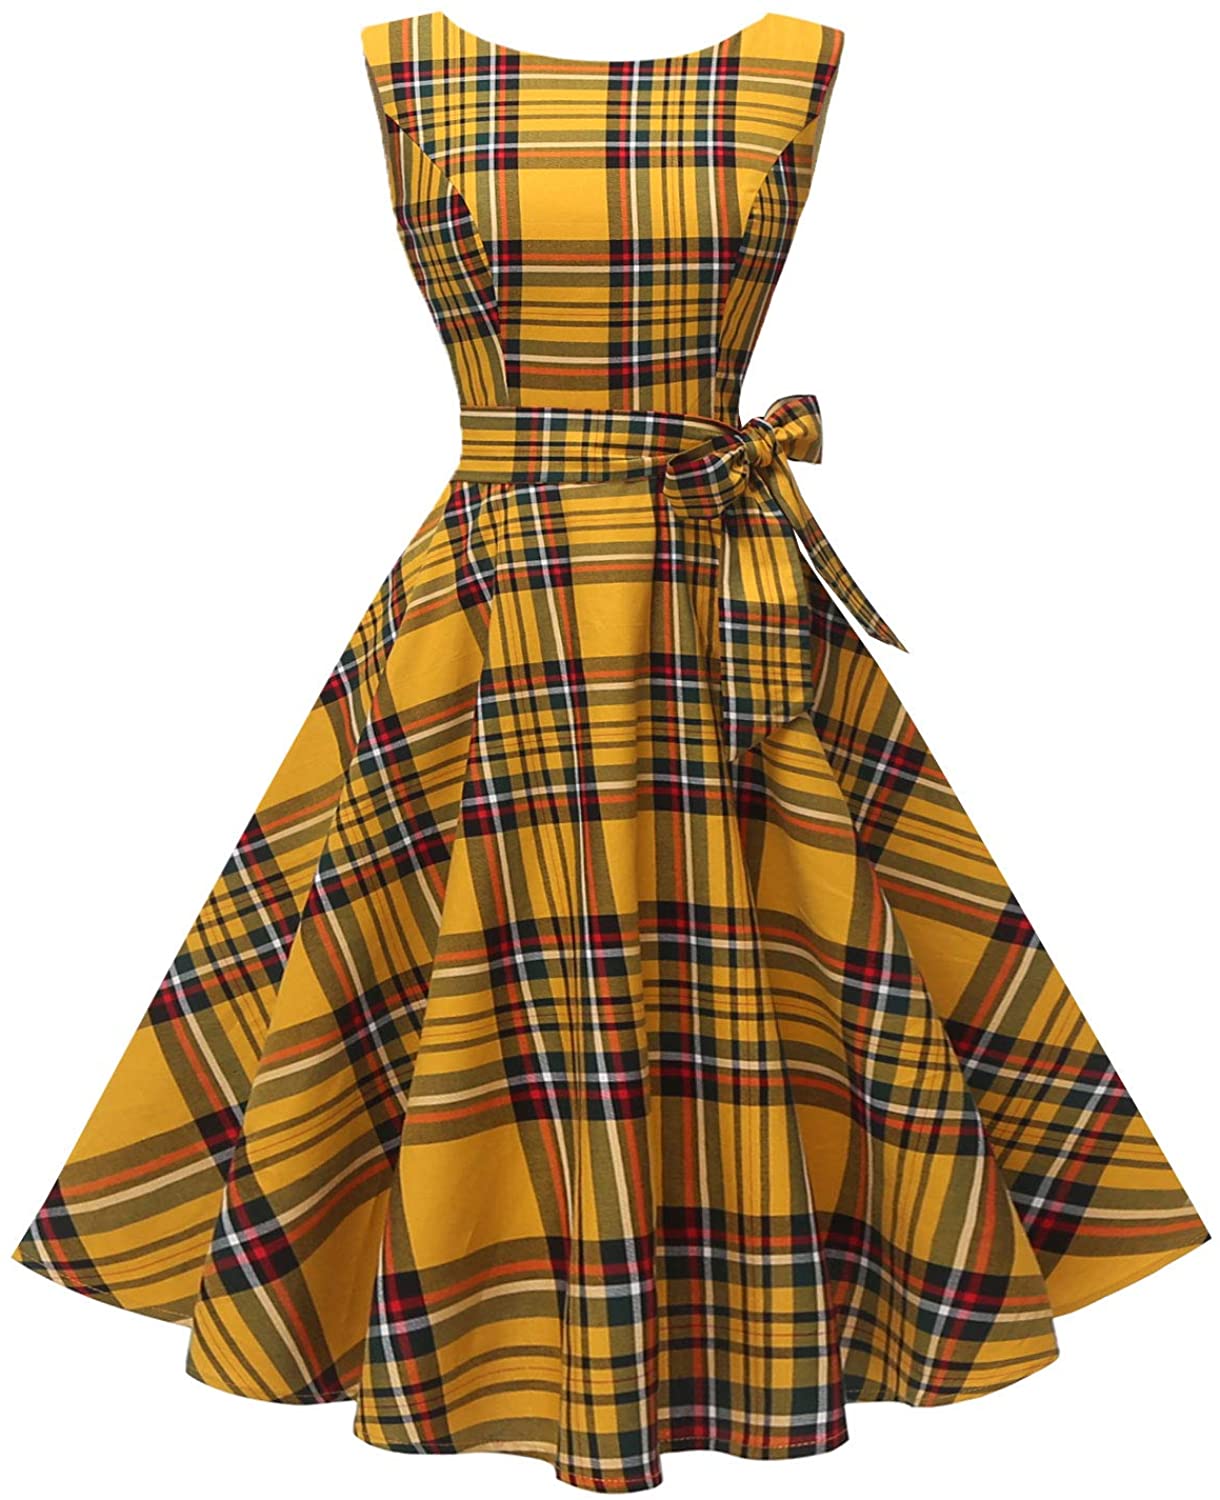 Hanpceirs Women's Boatneck Sleeveless Swing Vintage 1950s Cocktail Dress Goldplaid XS